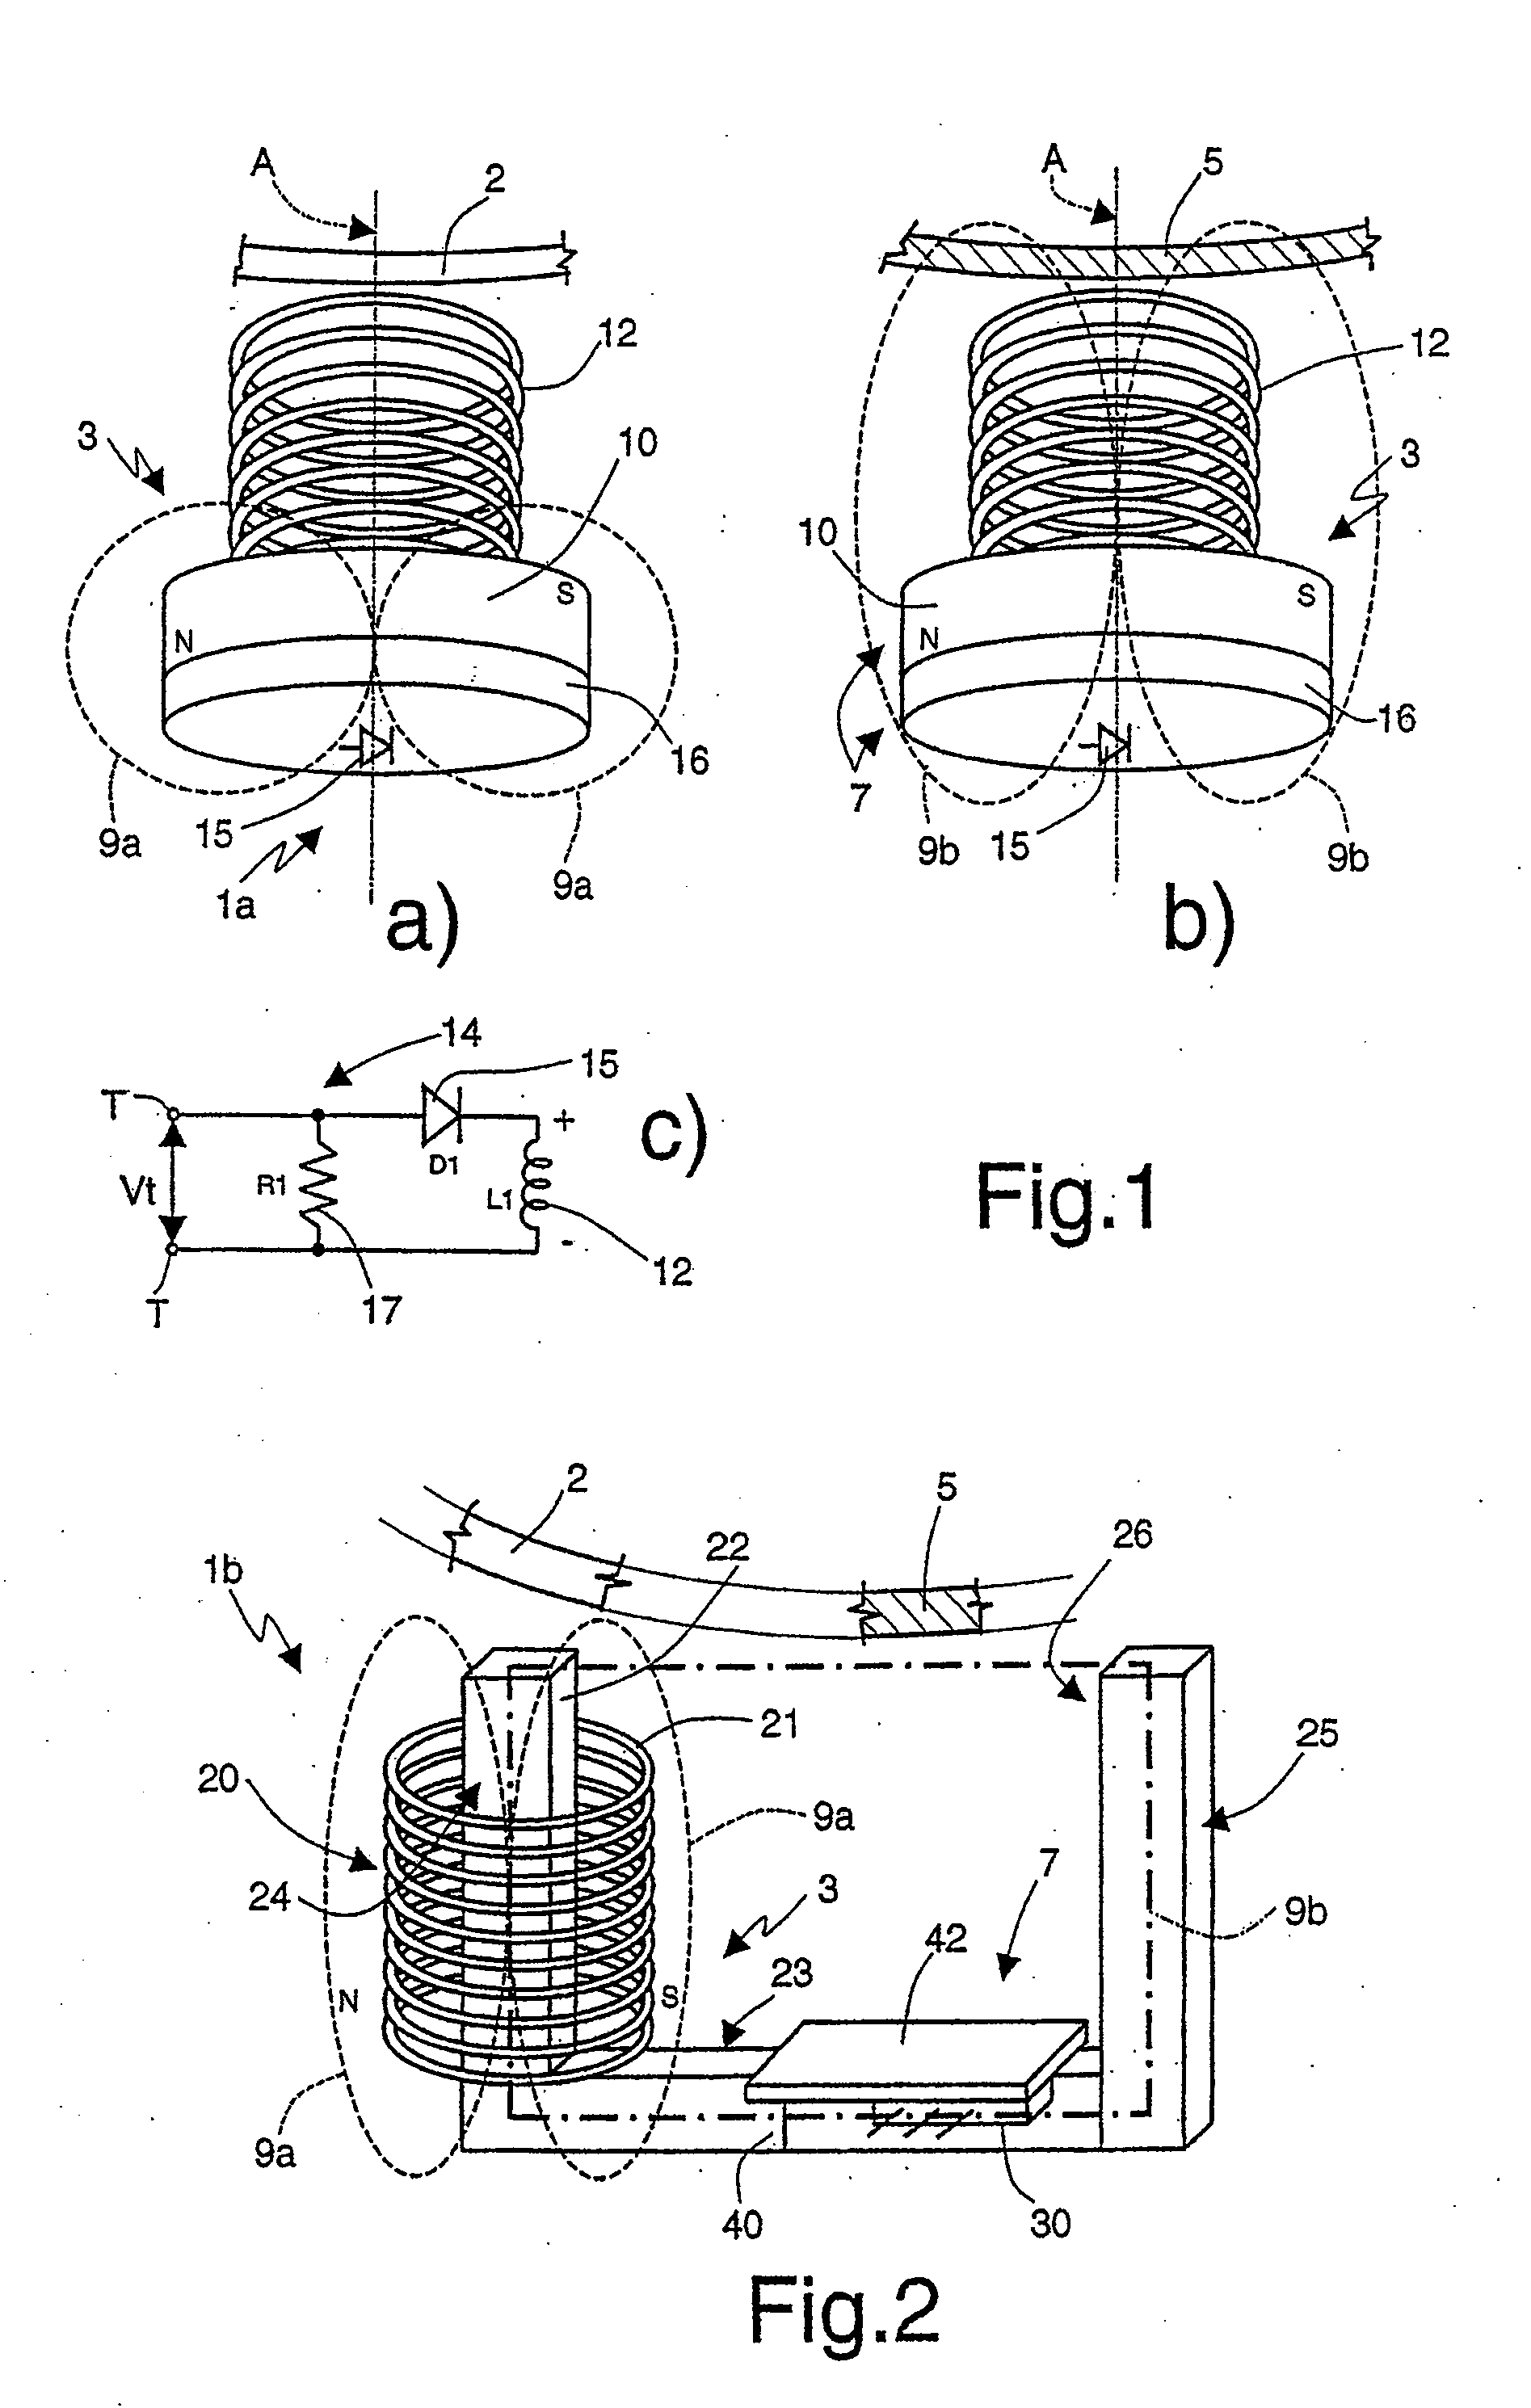 Detecting device of the angular position of a rotating member of an electric household appliance, in particular the drum of a washing machine